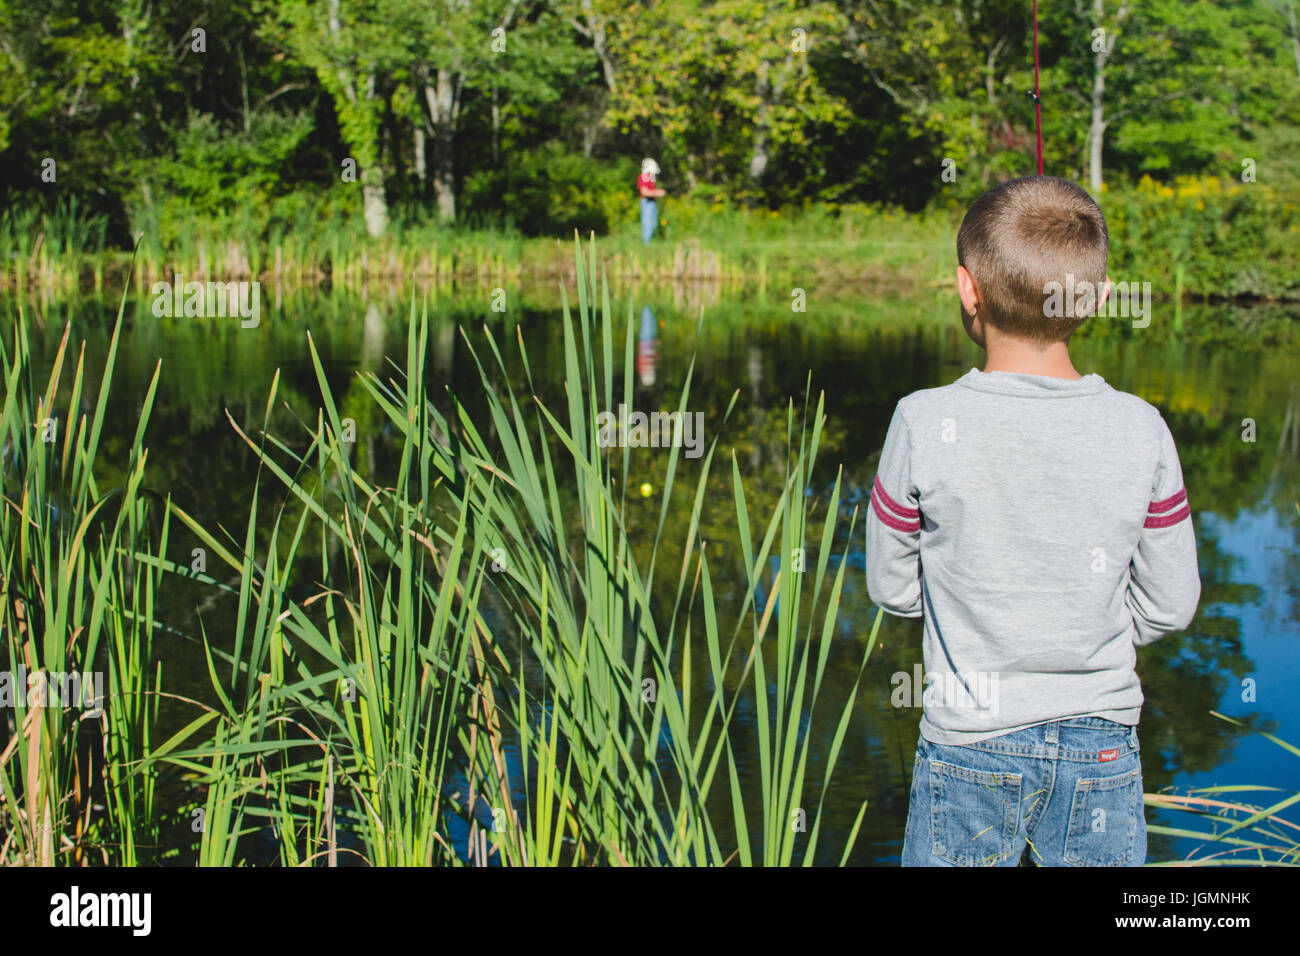 A child fishing on a dock at a pond in a rural area. Stock Photo